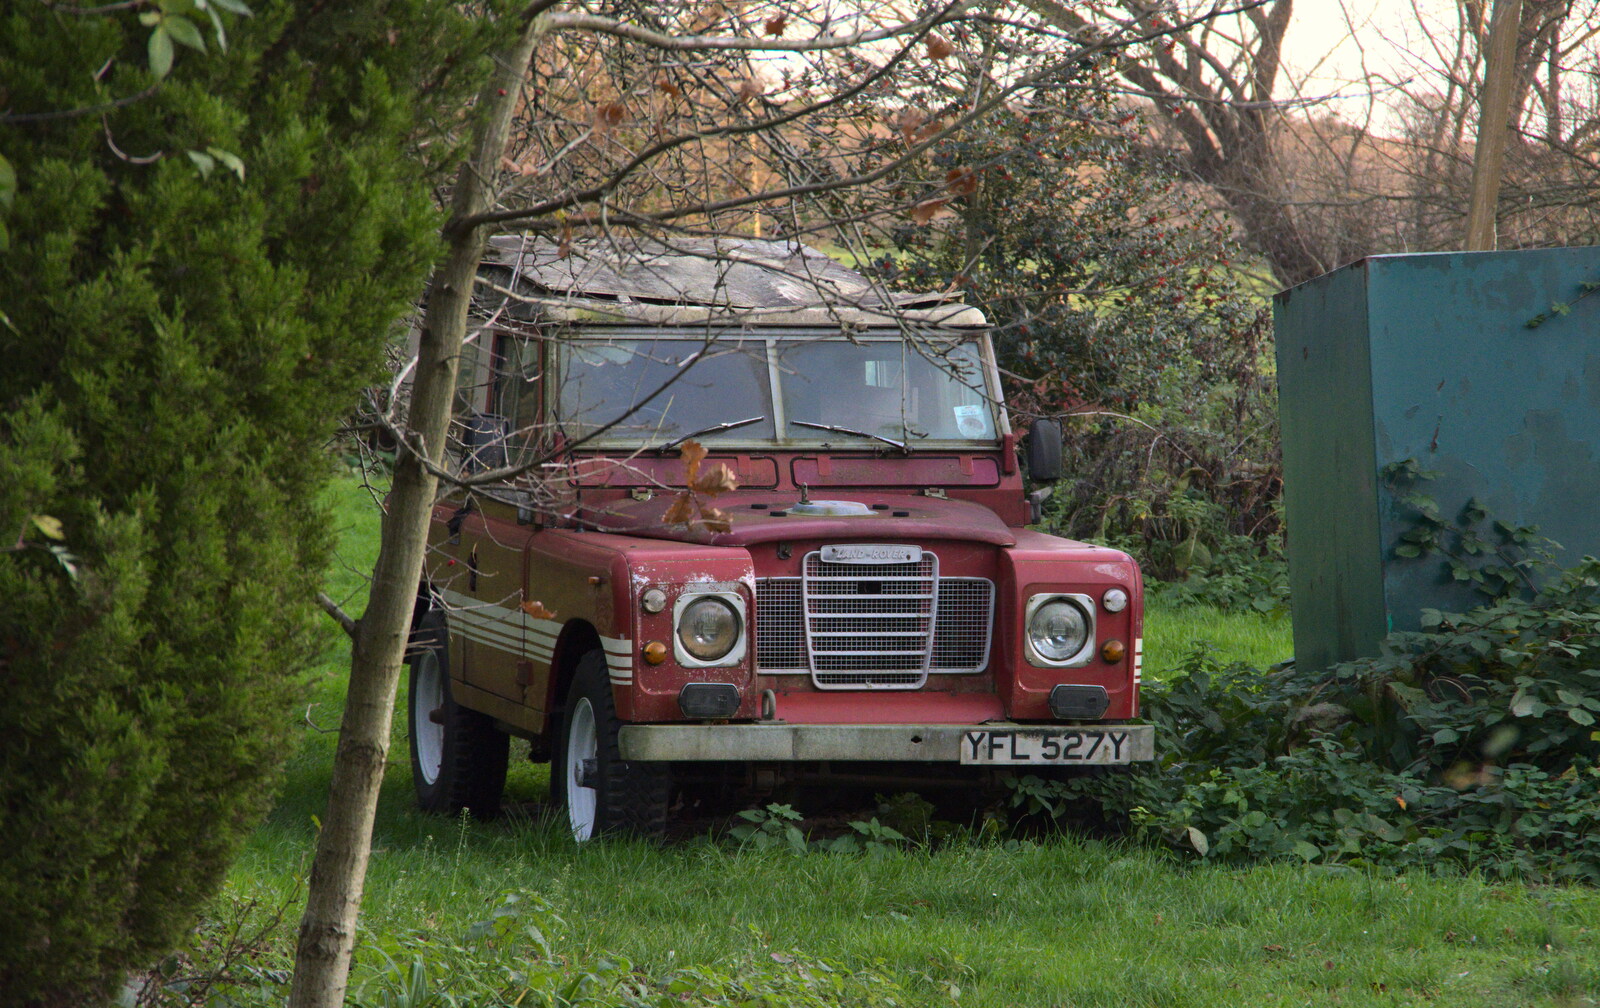 An abandoned 1983 Land Rover is in quite good nick from The Dereliction of Eye, Suffolk - 22nd November 2020